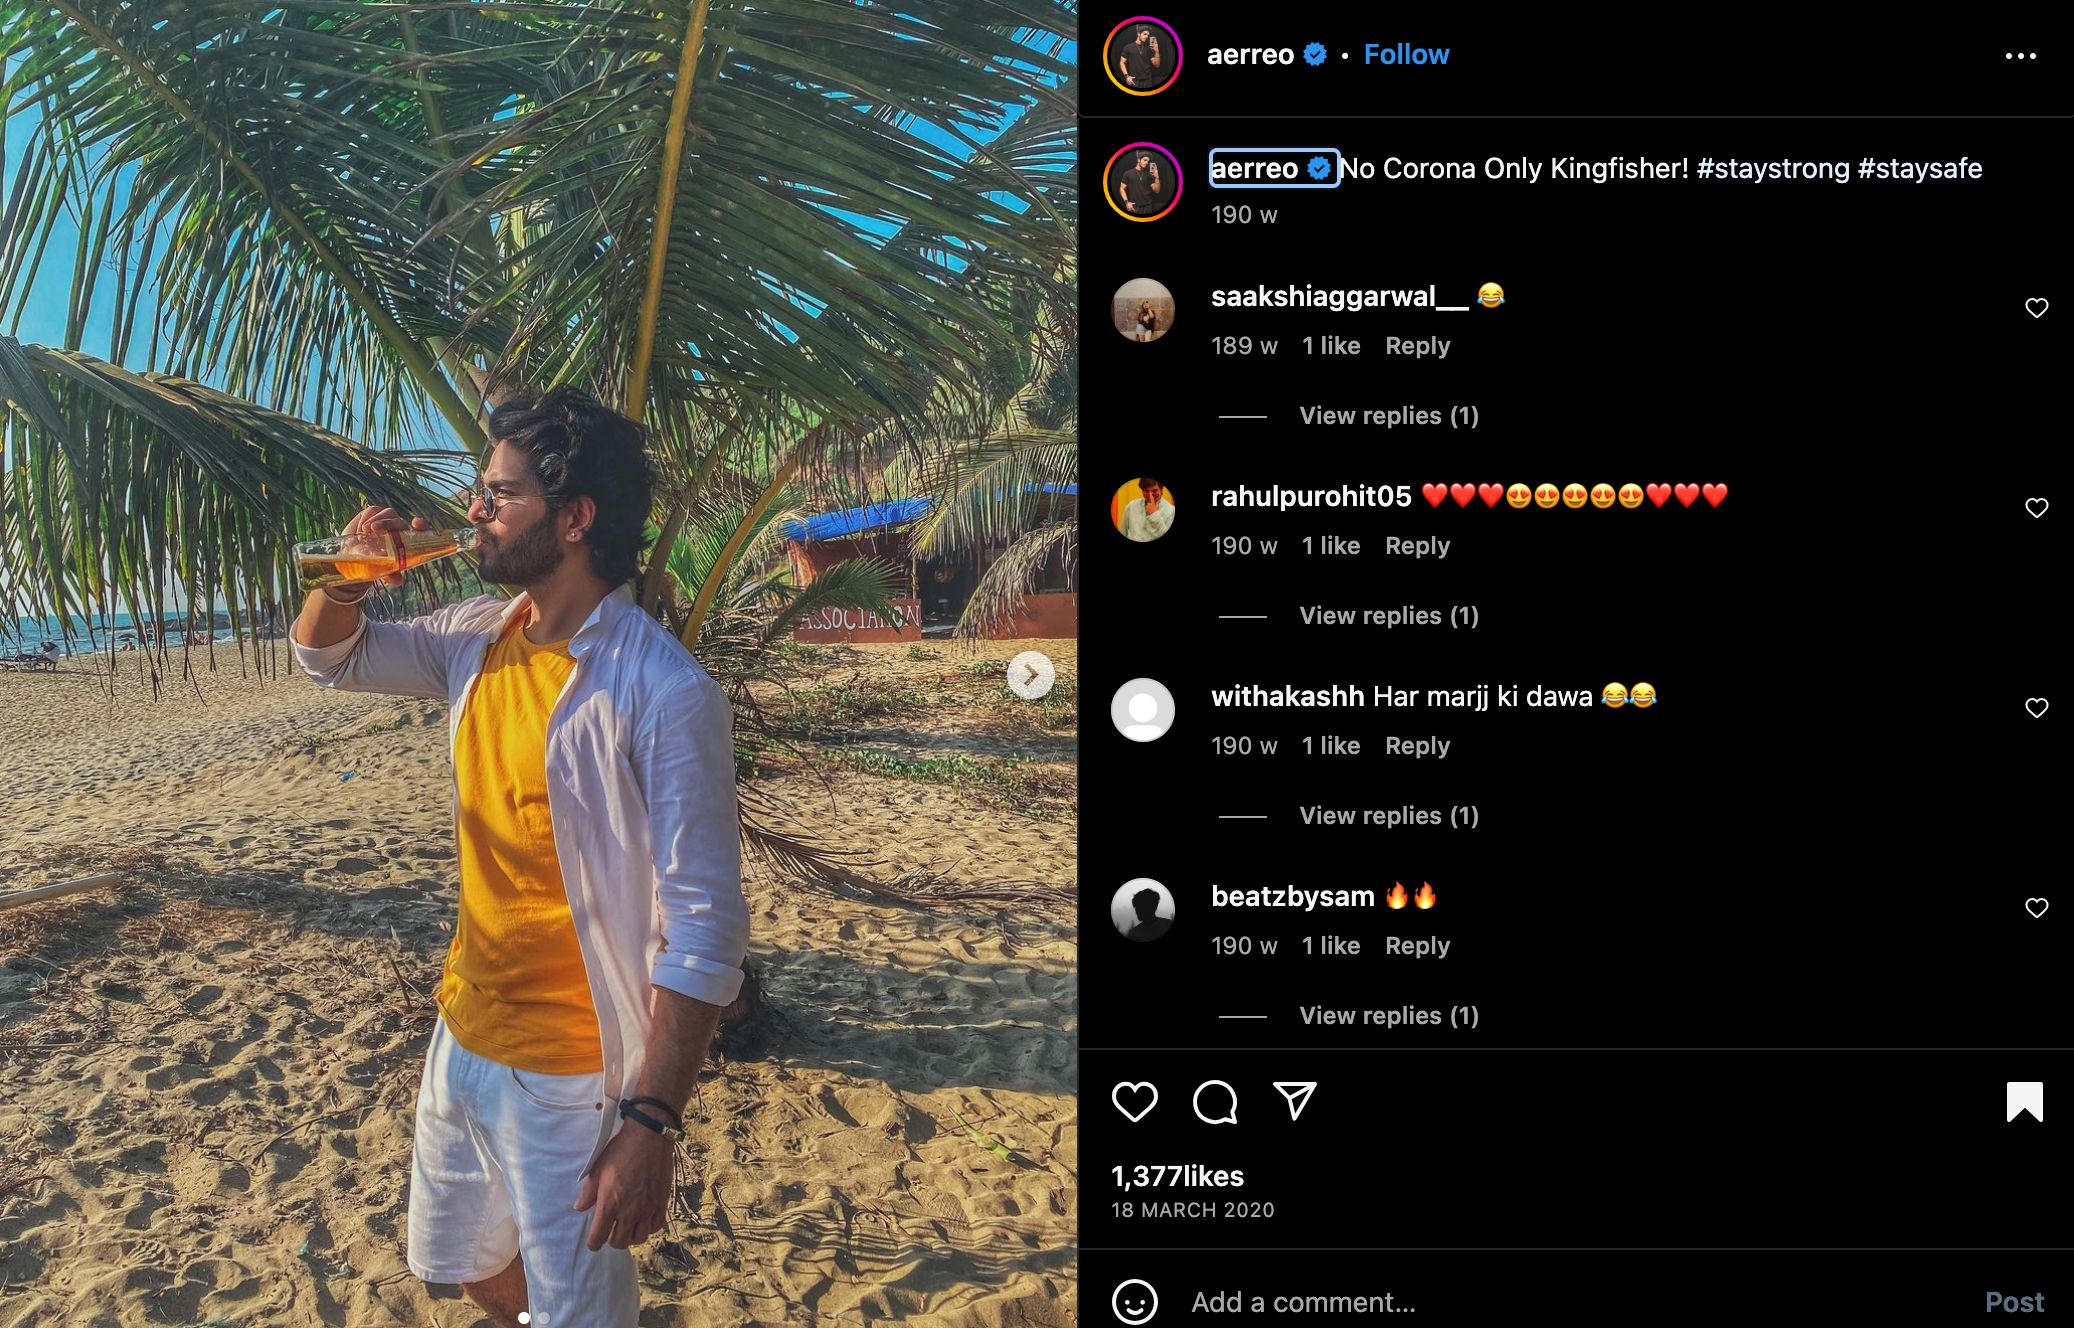 Nikhil Mehta's Instagram post about his vacation in Goa